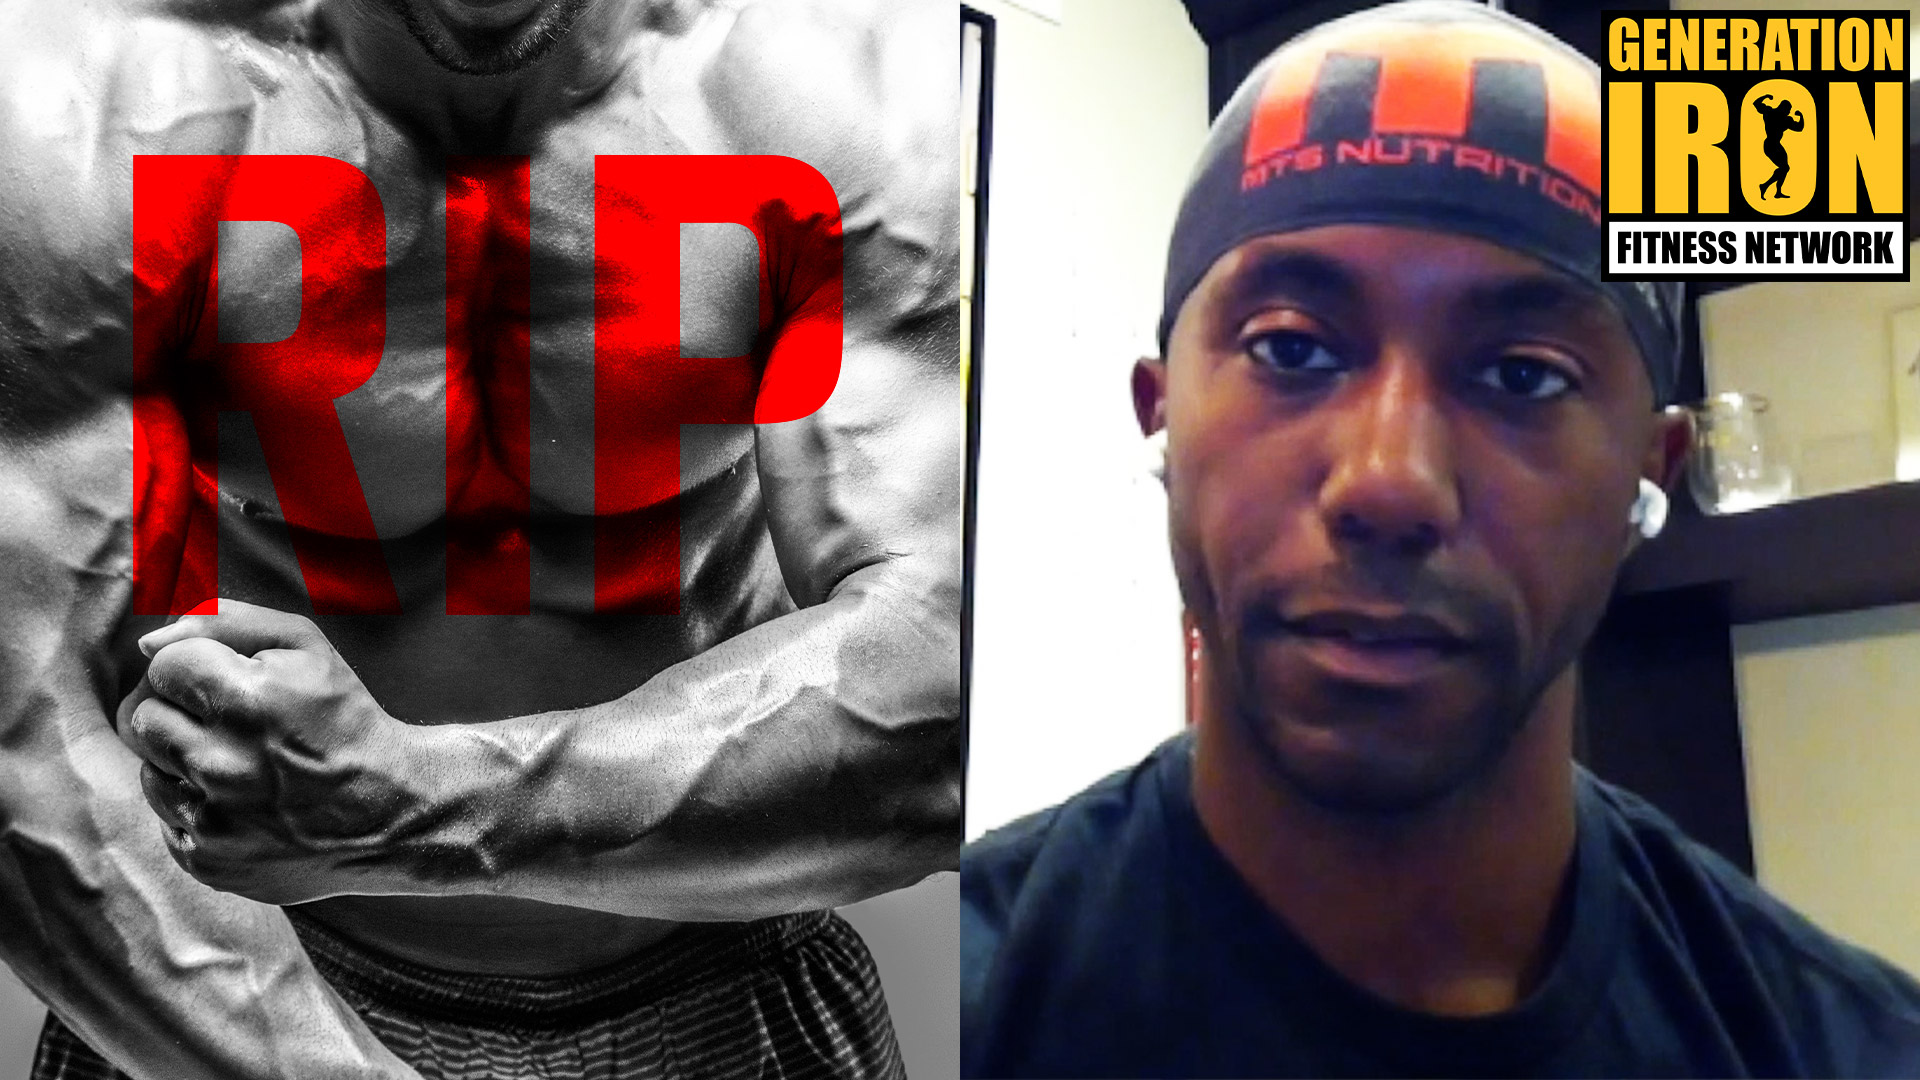 Colin Congo: It’s Naive To Think Drugs Are Not Related To Bodybuilding Deaths